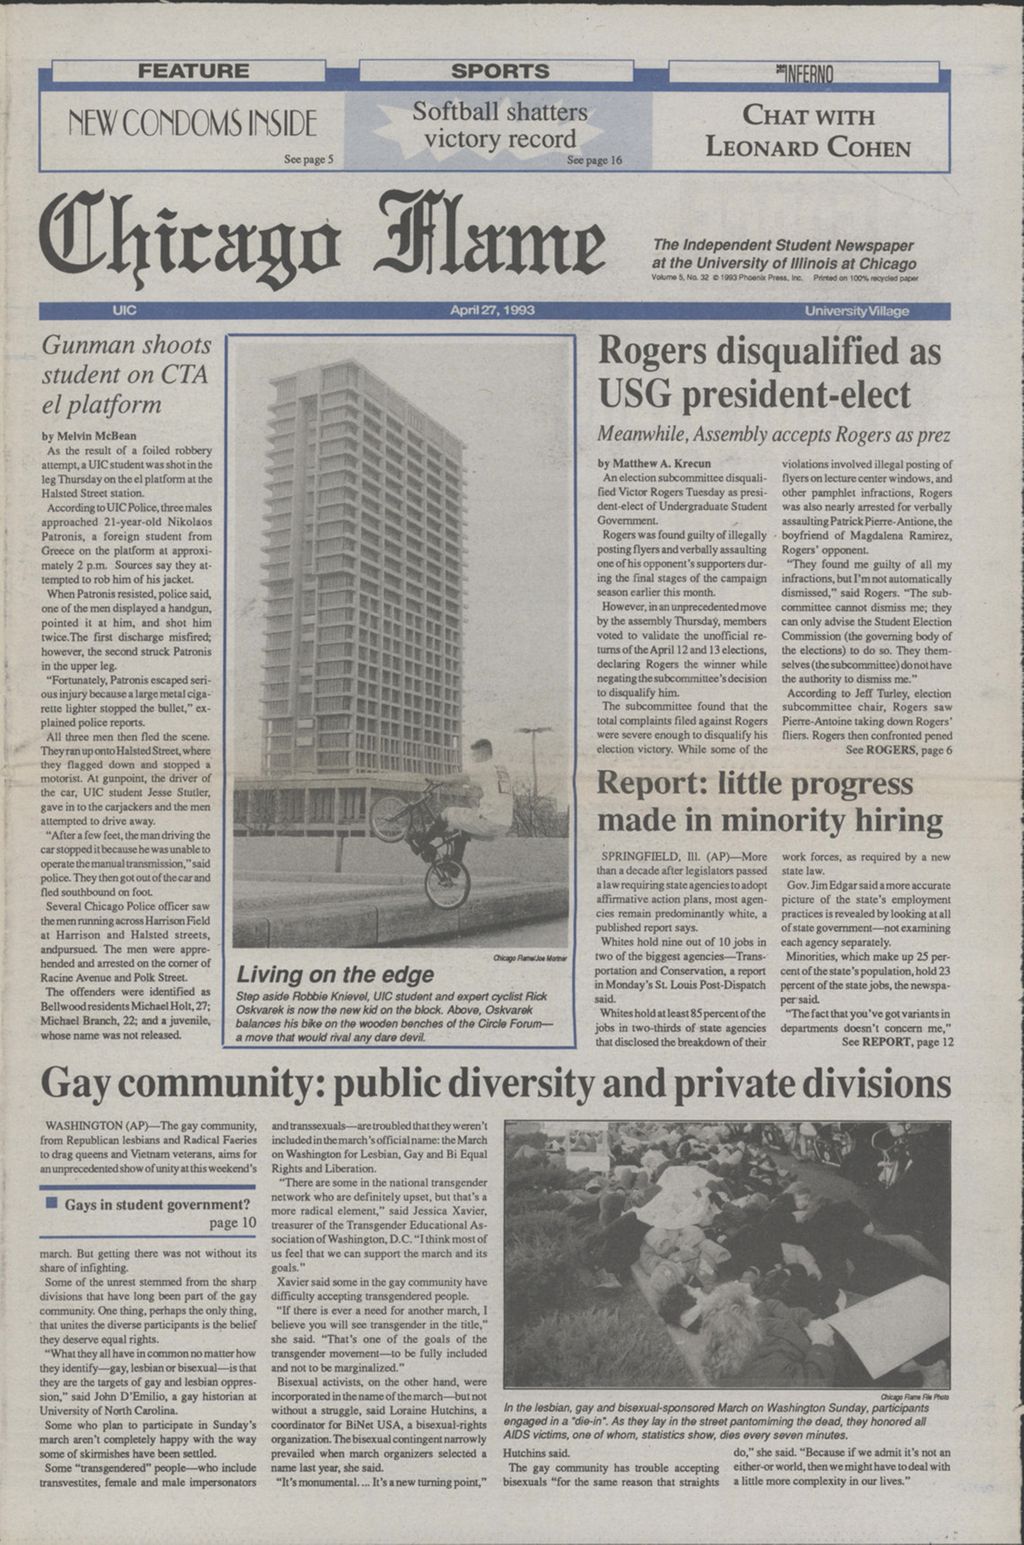 Chicago Flame (April 27, 1993)